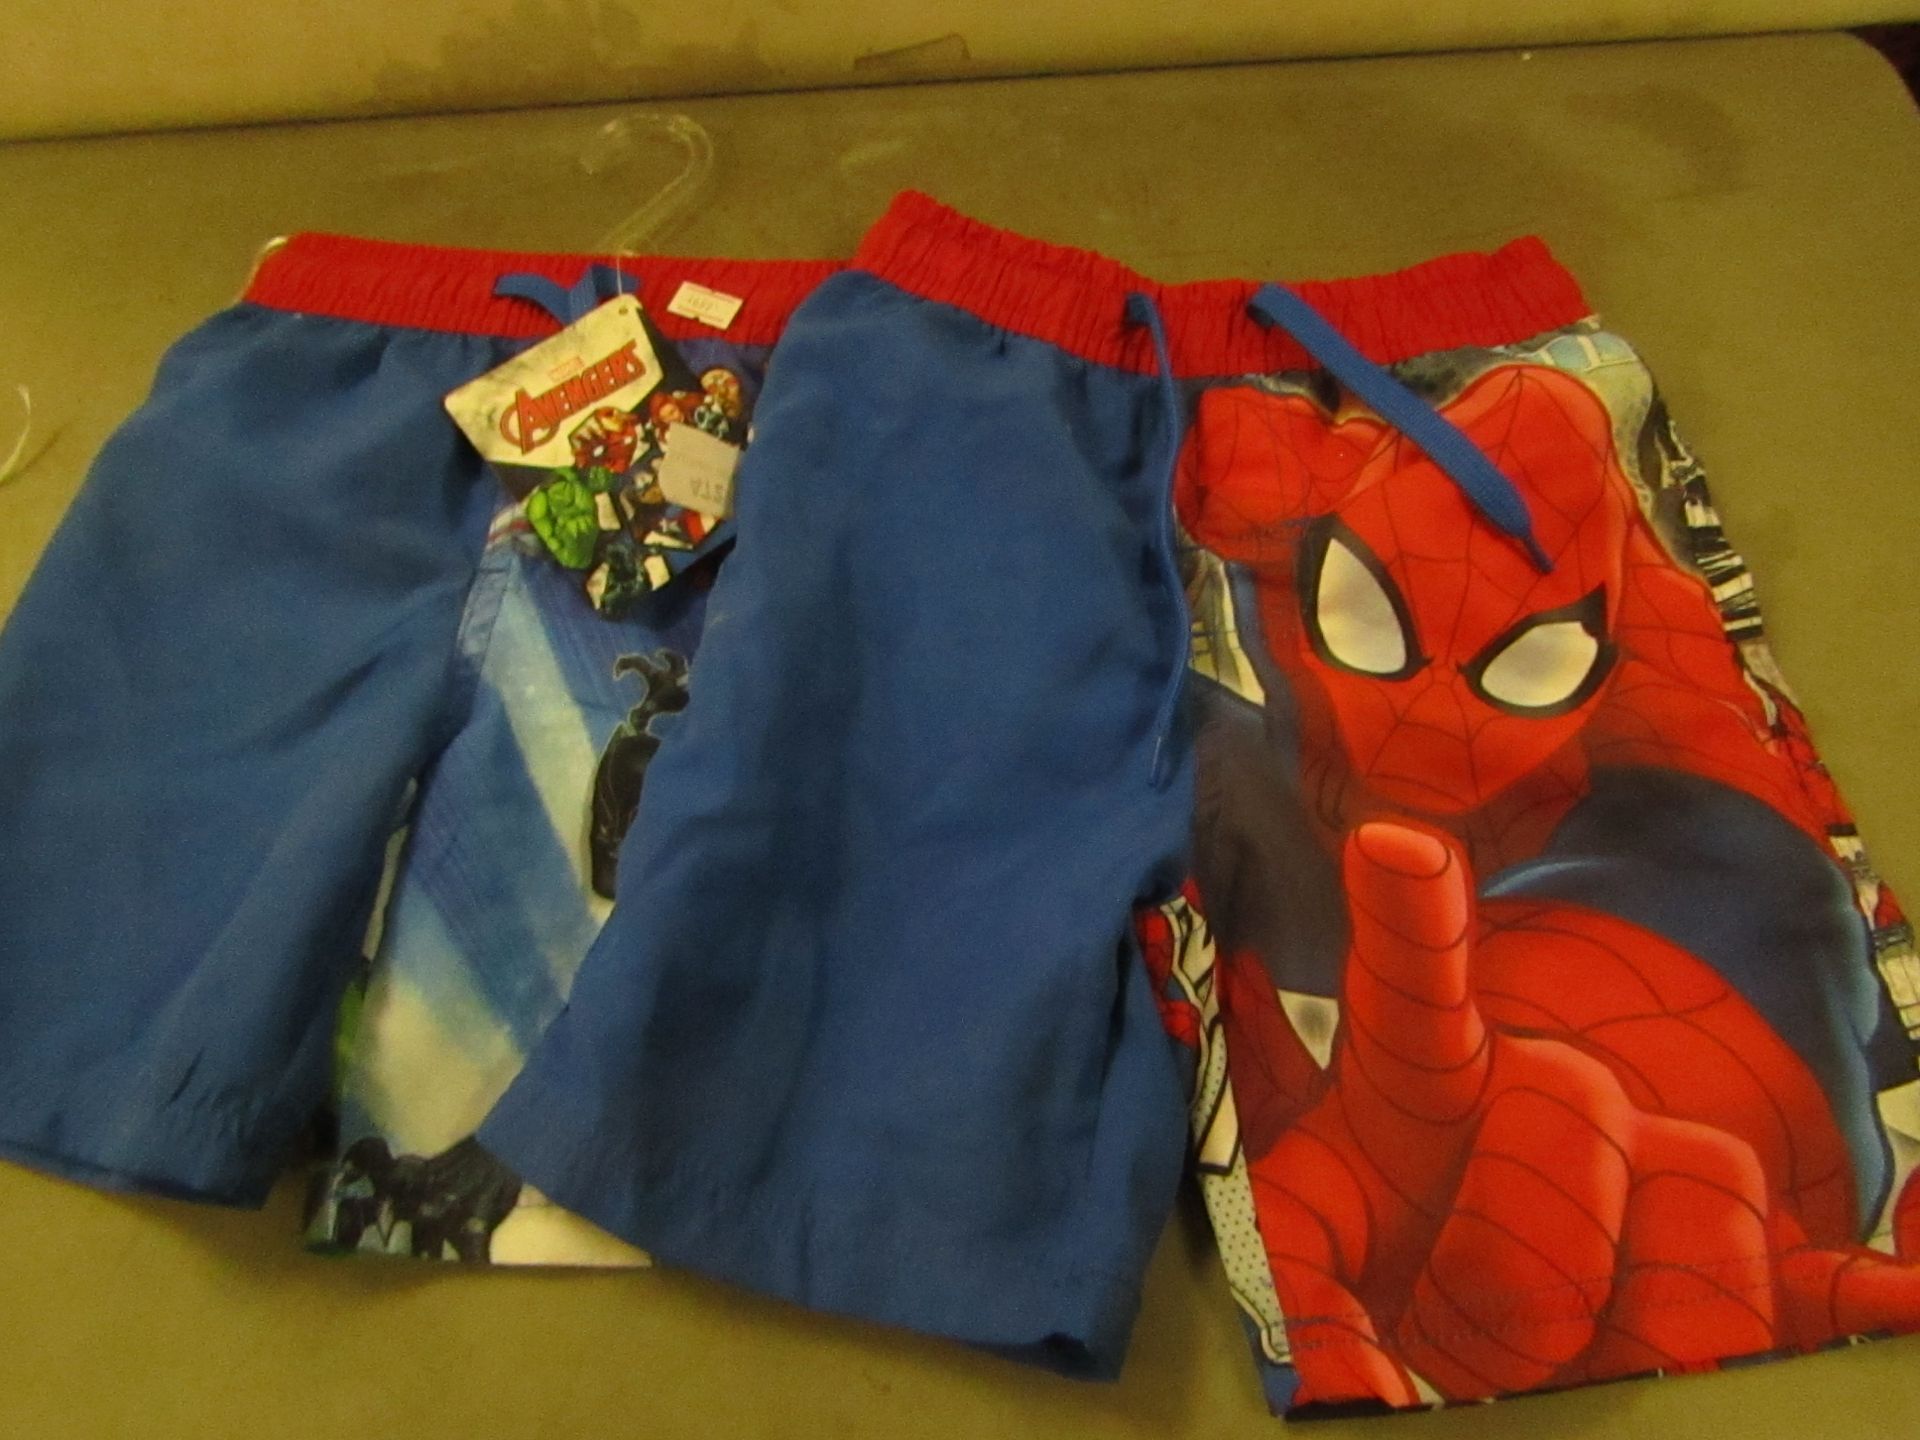 2 X Pairs of Avenger Shorts 1 12 to 24 Months 1 2 to 3 yrs Both New